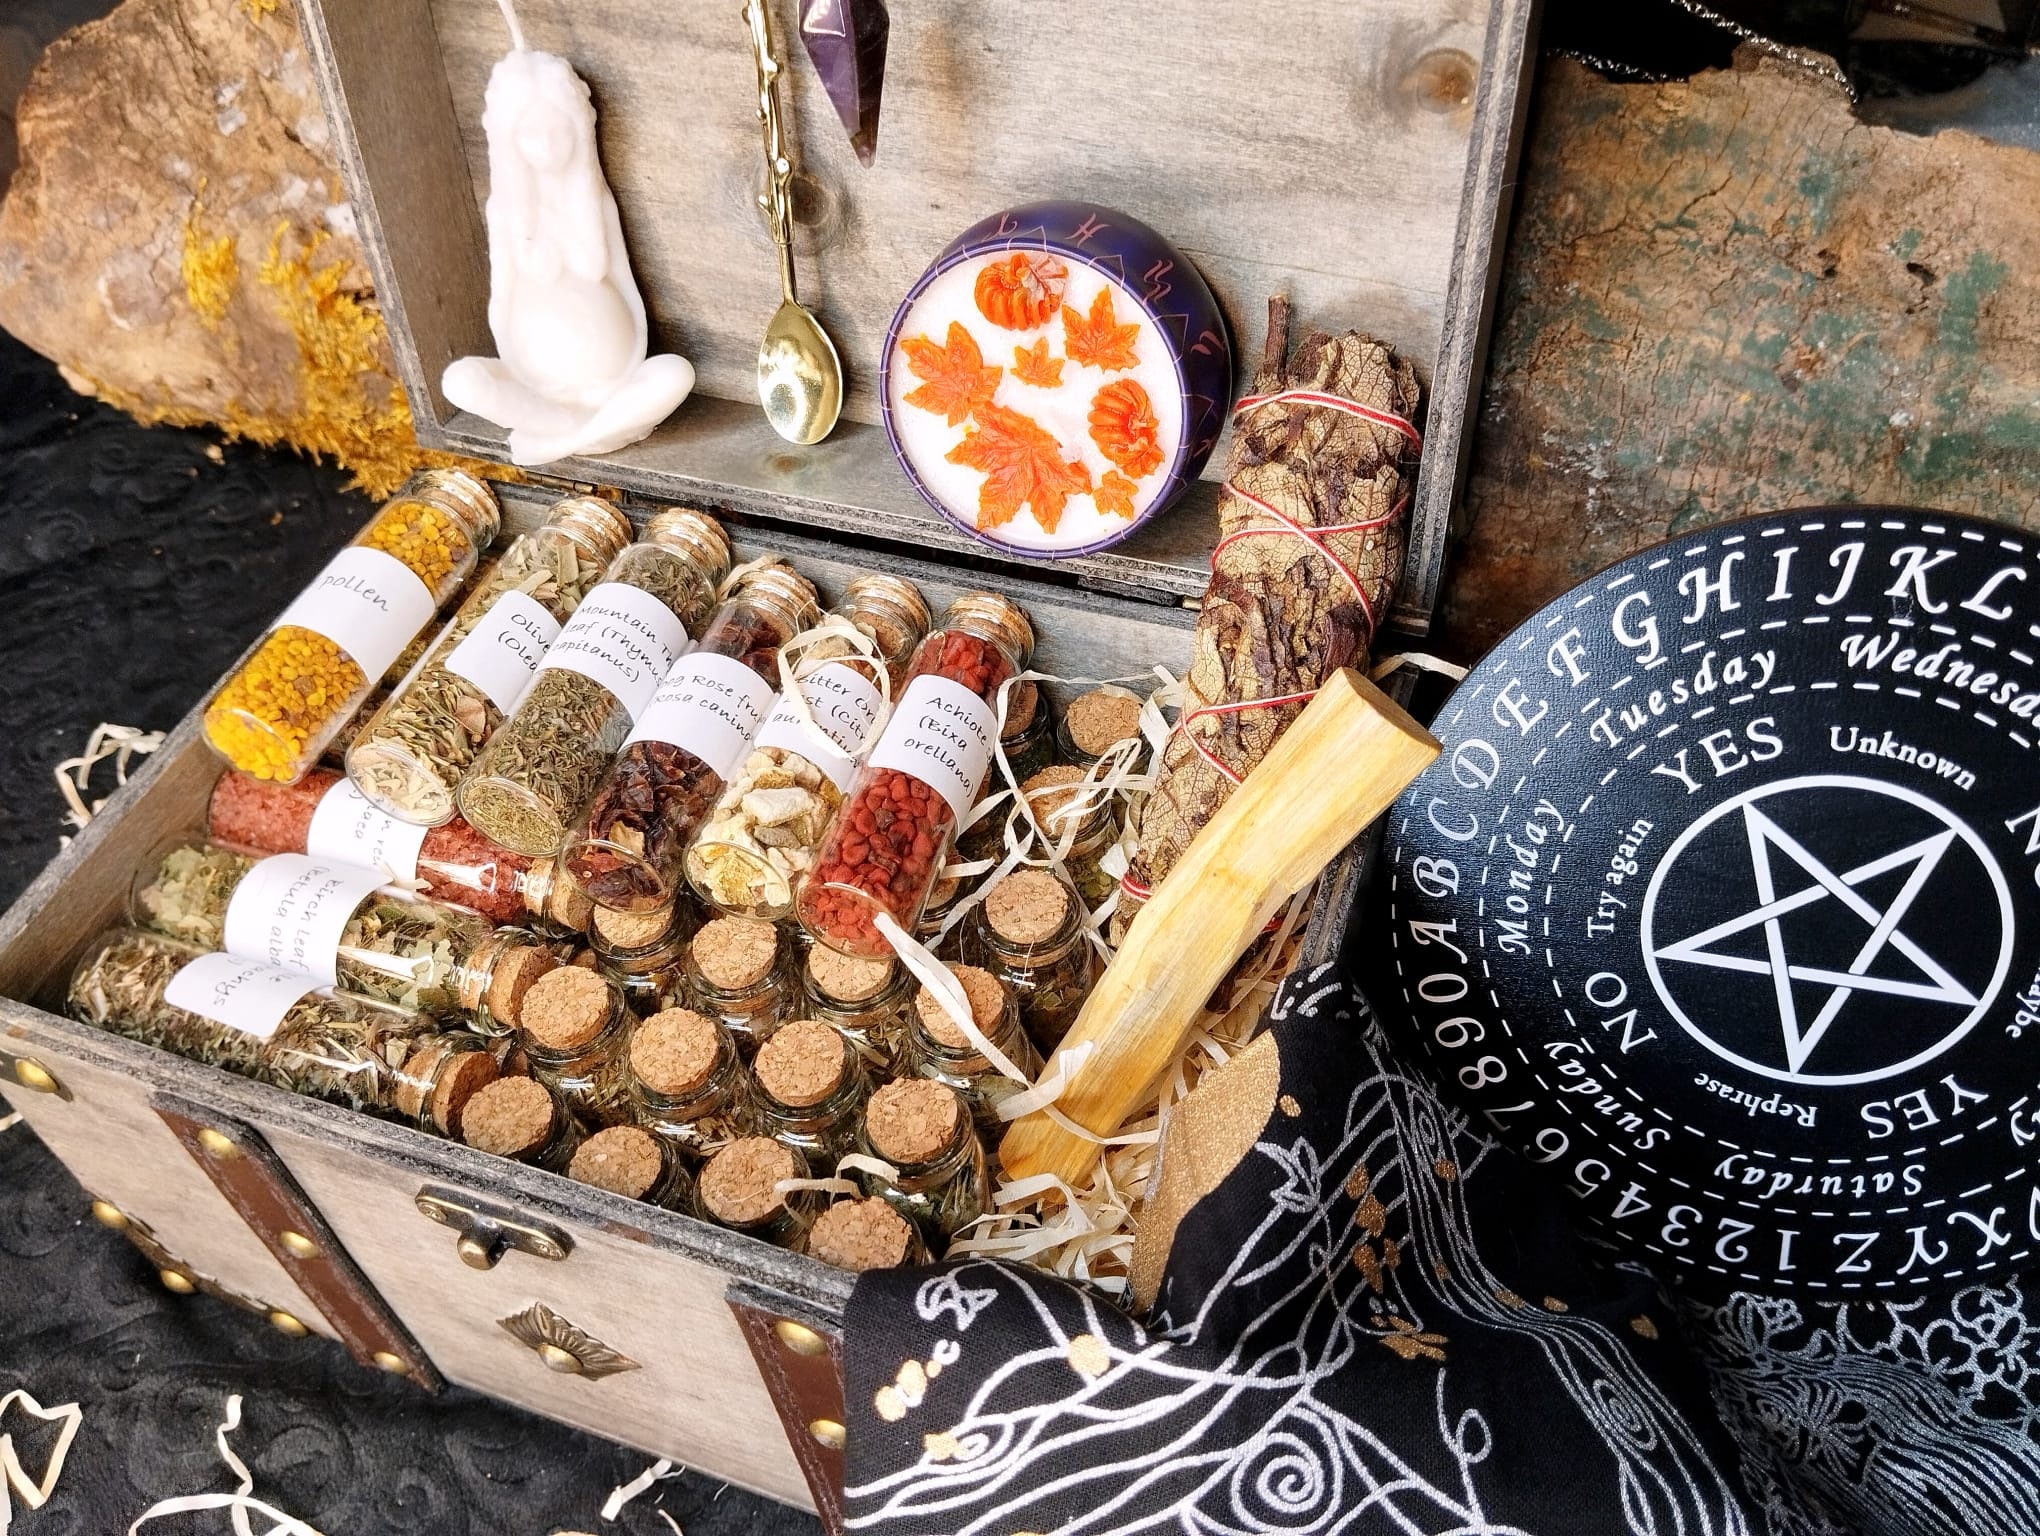  Witchcraft Supplies Kit for Witch Altar 54PCS - Spell Candles  Witches Crystals Jars Herbs Spells Beginner Box Starter : Home & Kitchen